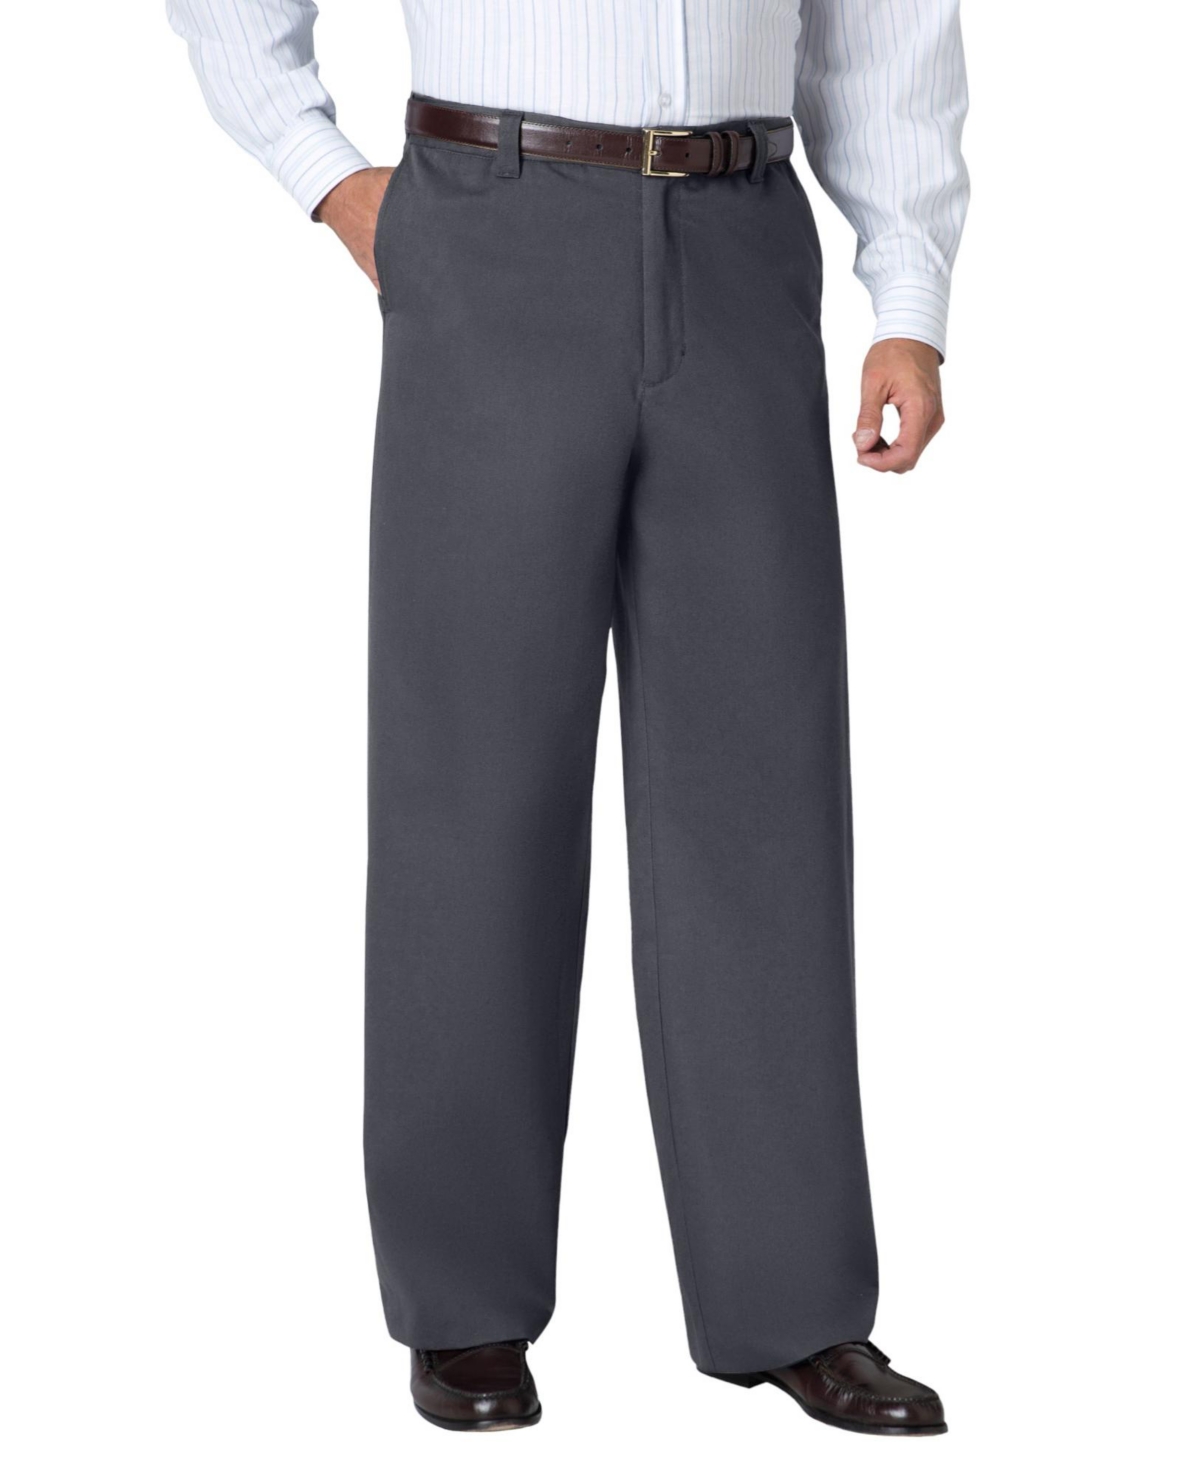 Big & Tall Wrinkle-Free Pants With Expandable Waist, Wide Leg - Carbon